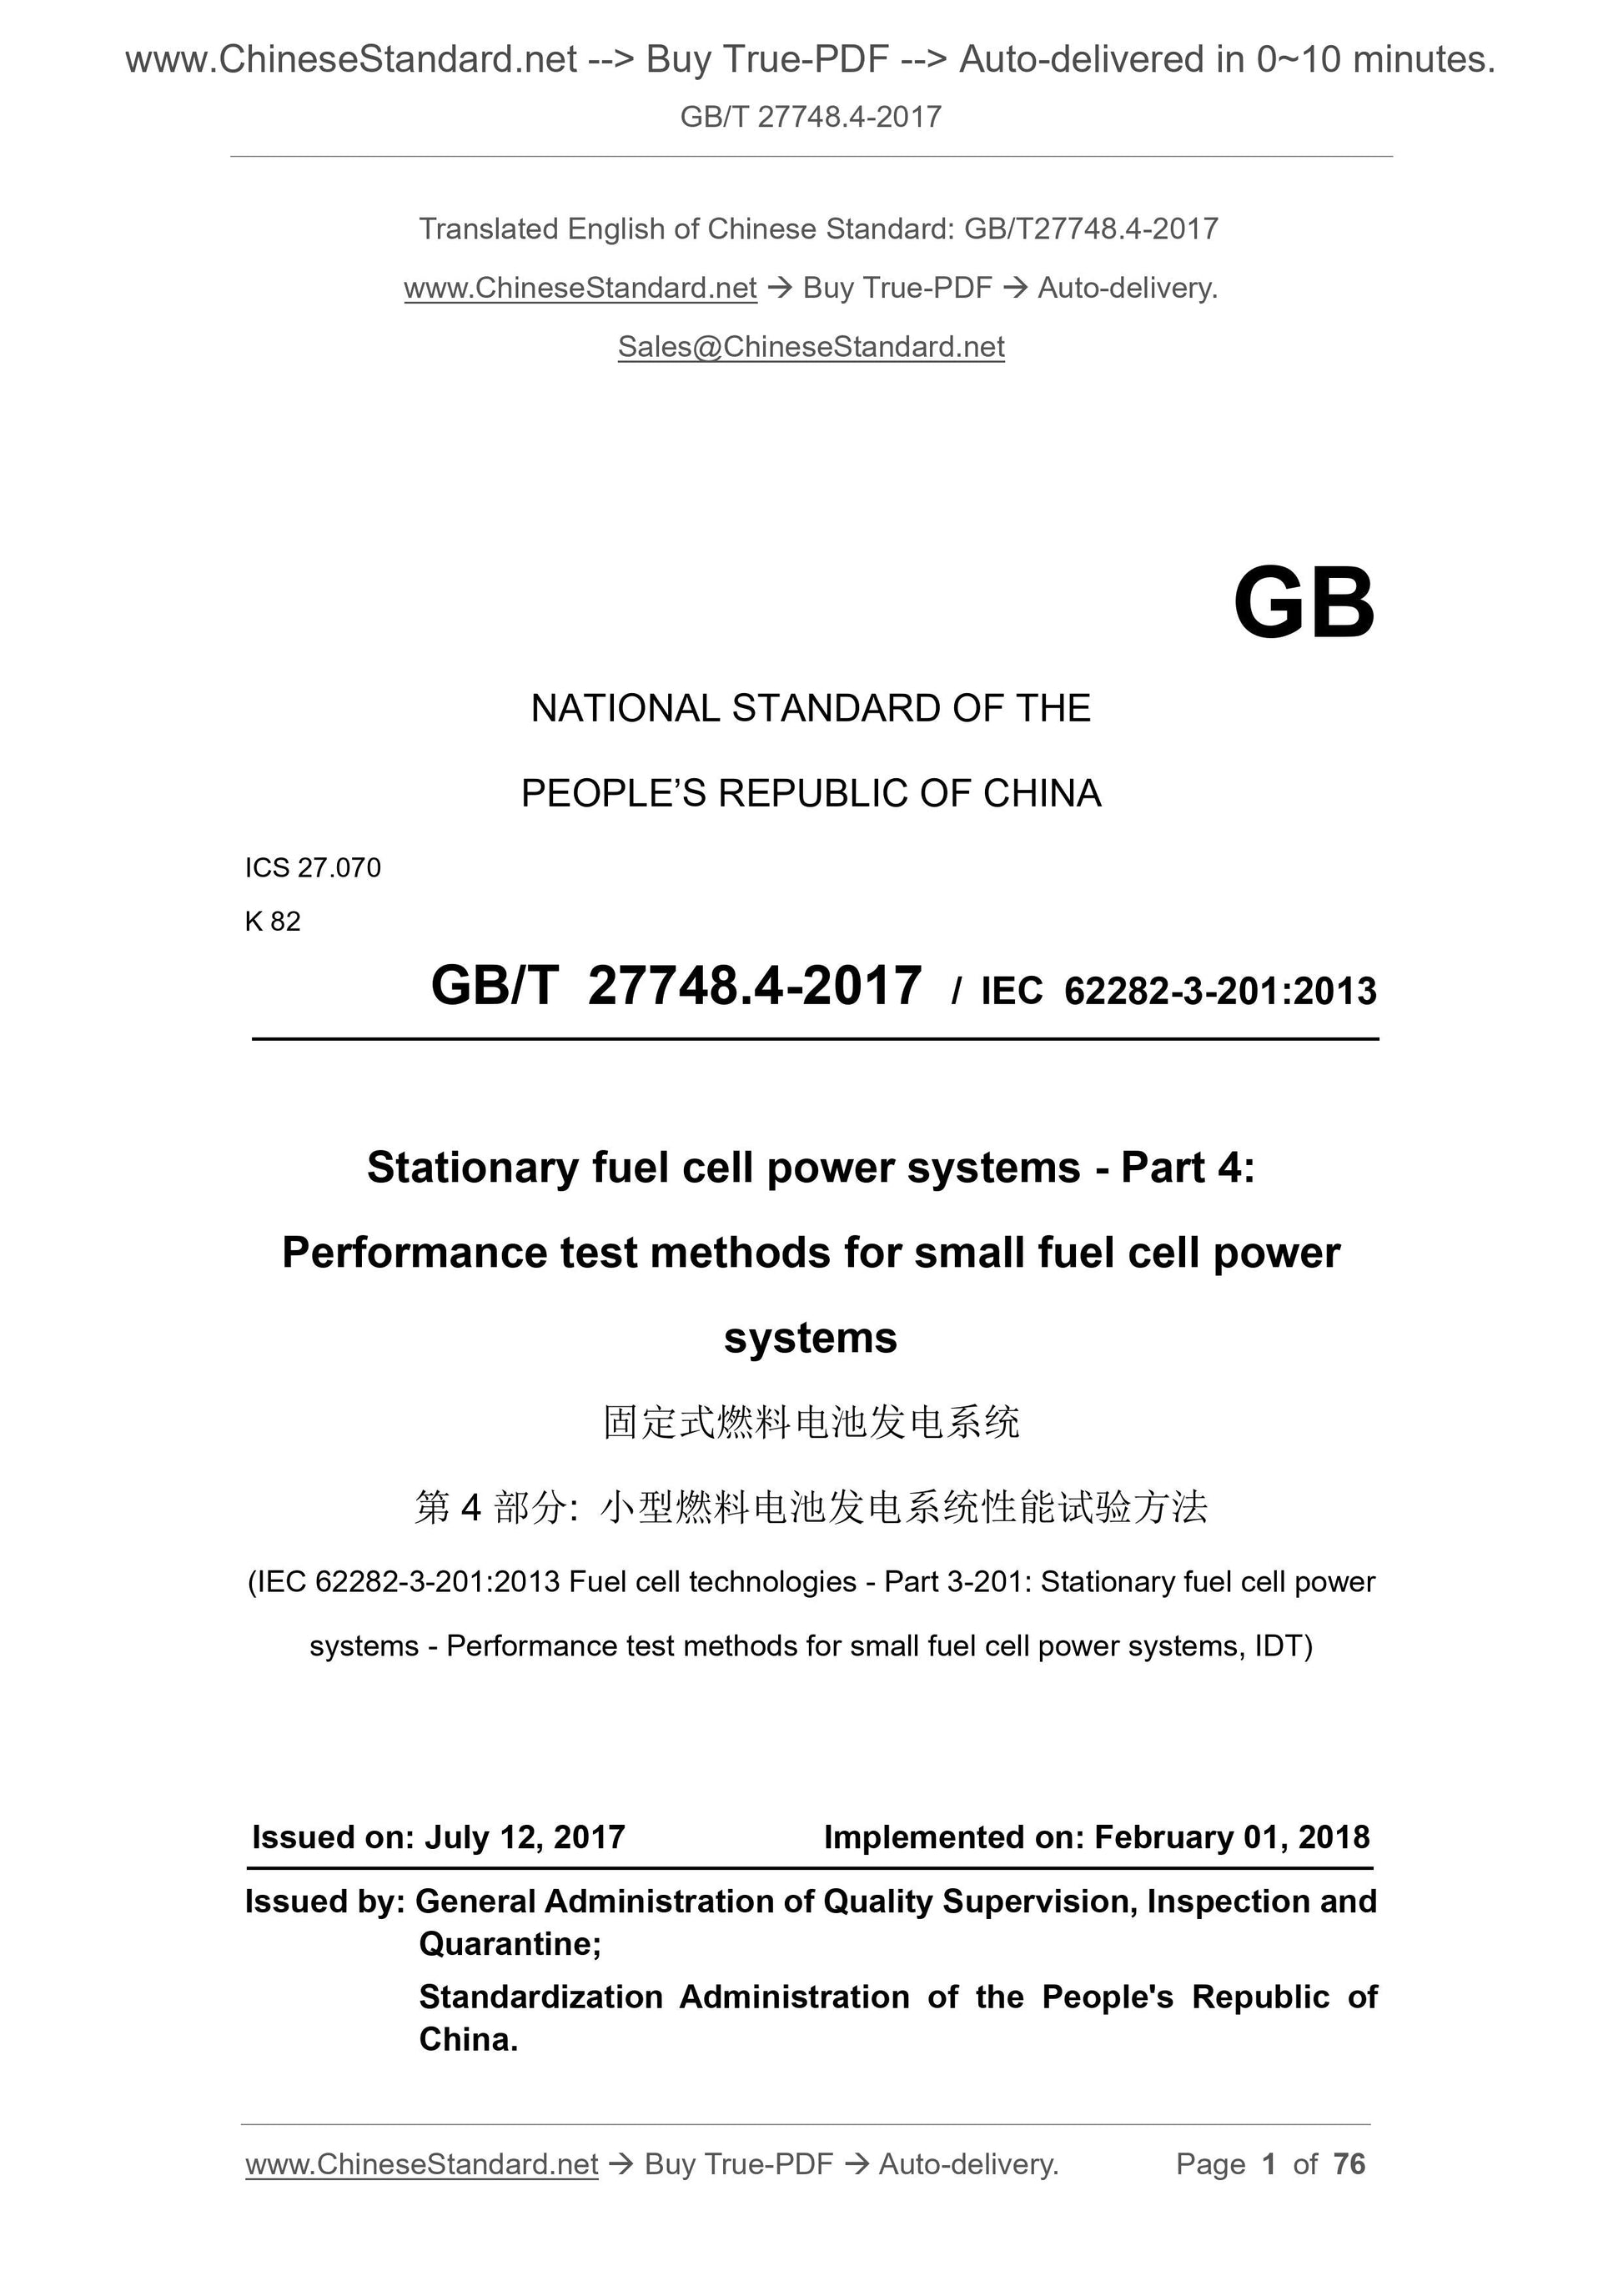 GB/T 27748.4-2017 Page 1